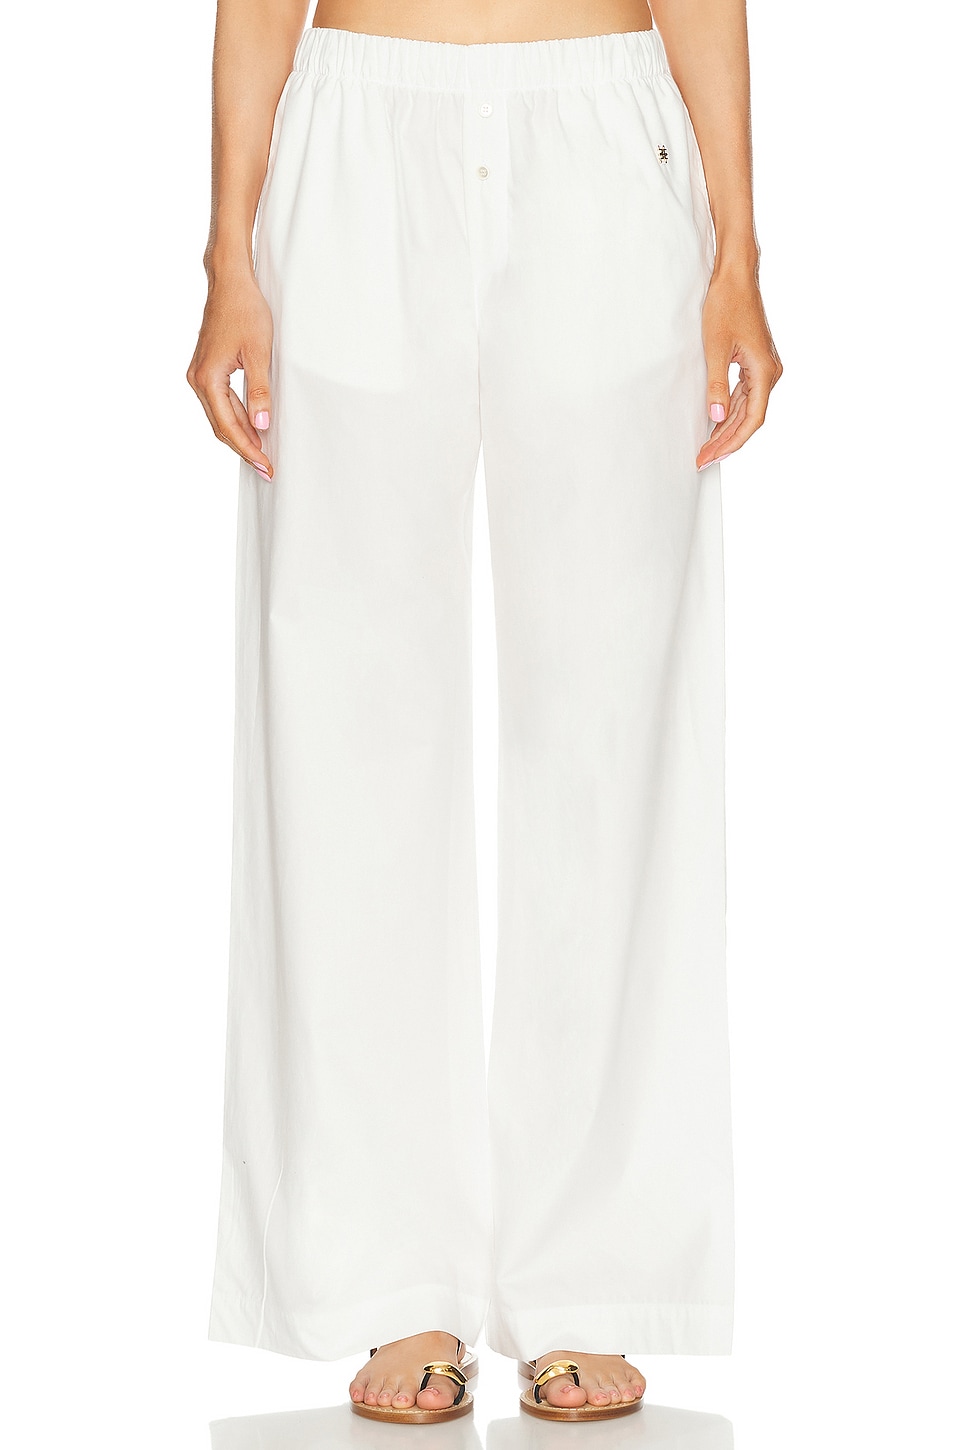 Image 1 of Eterne Lounge Pant in White